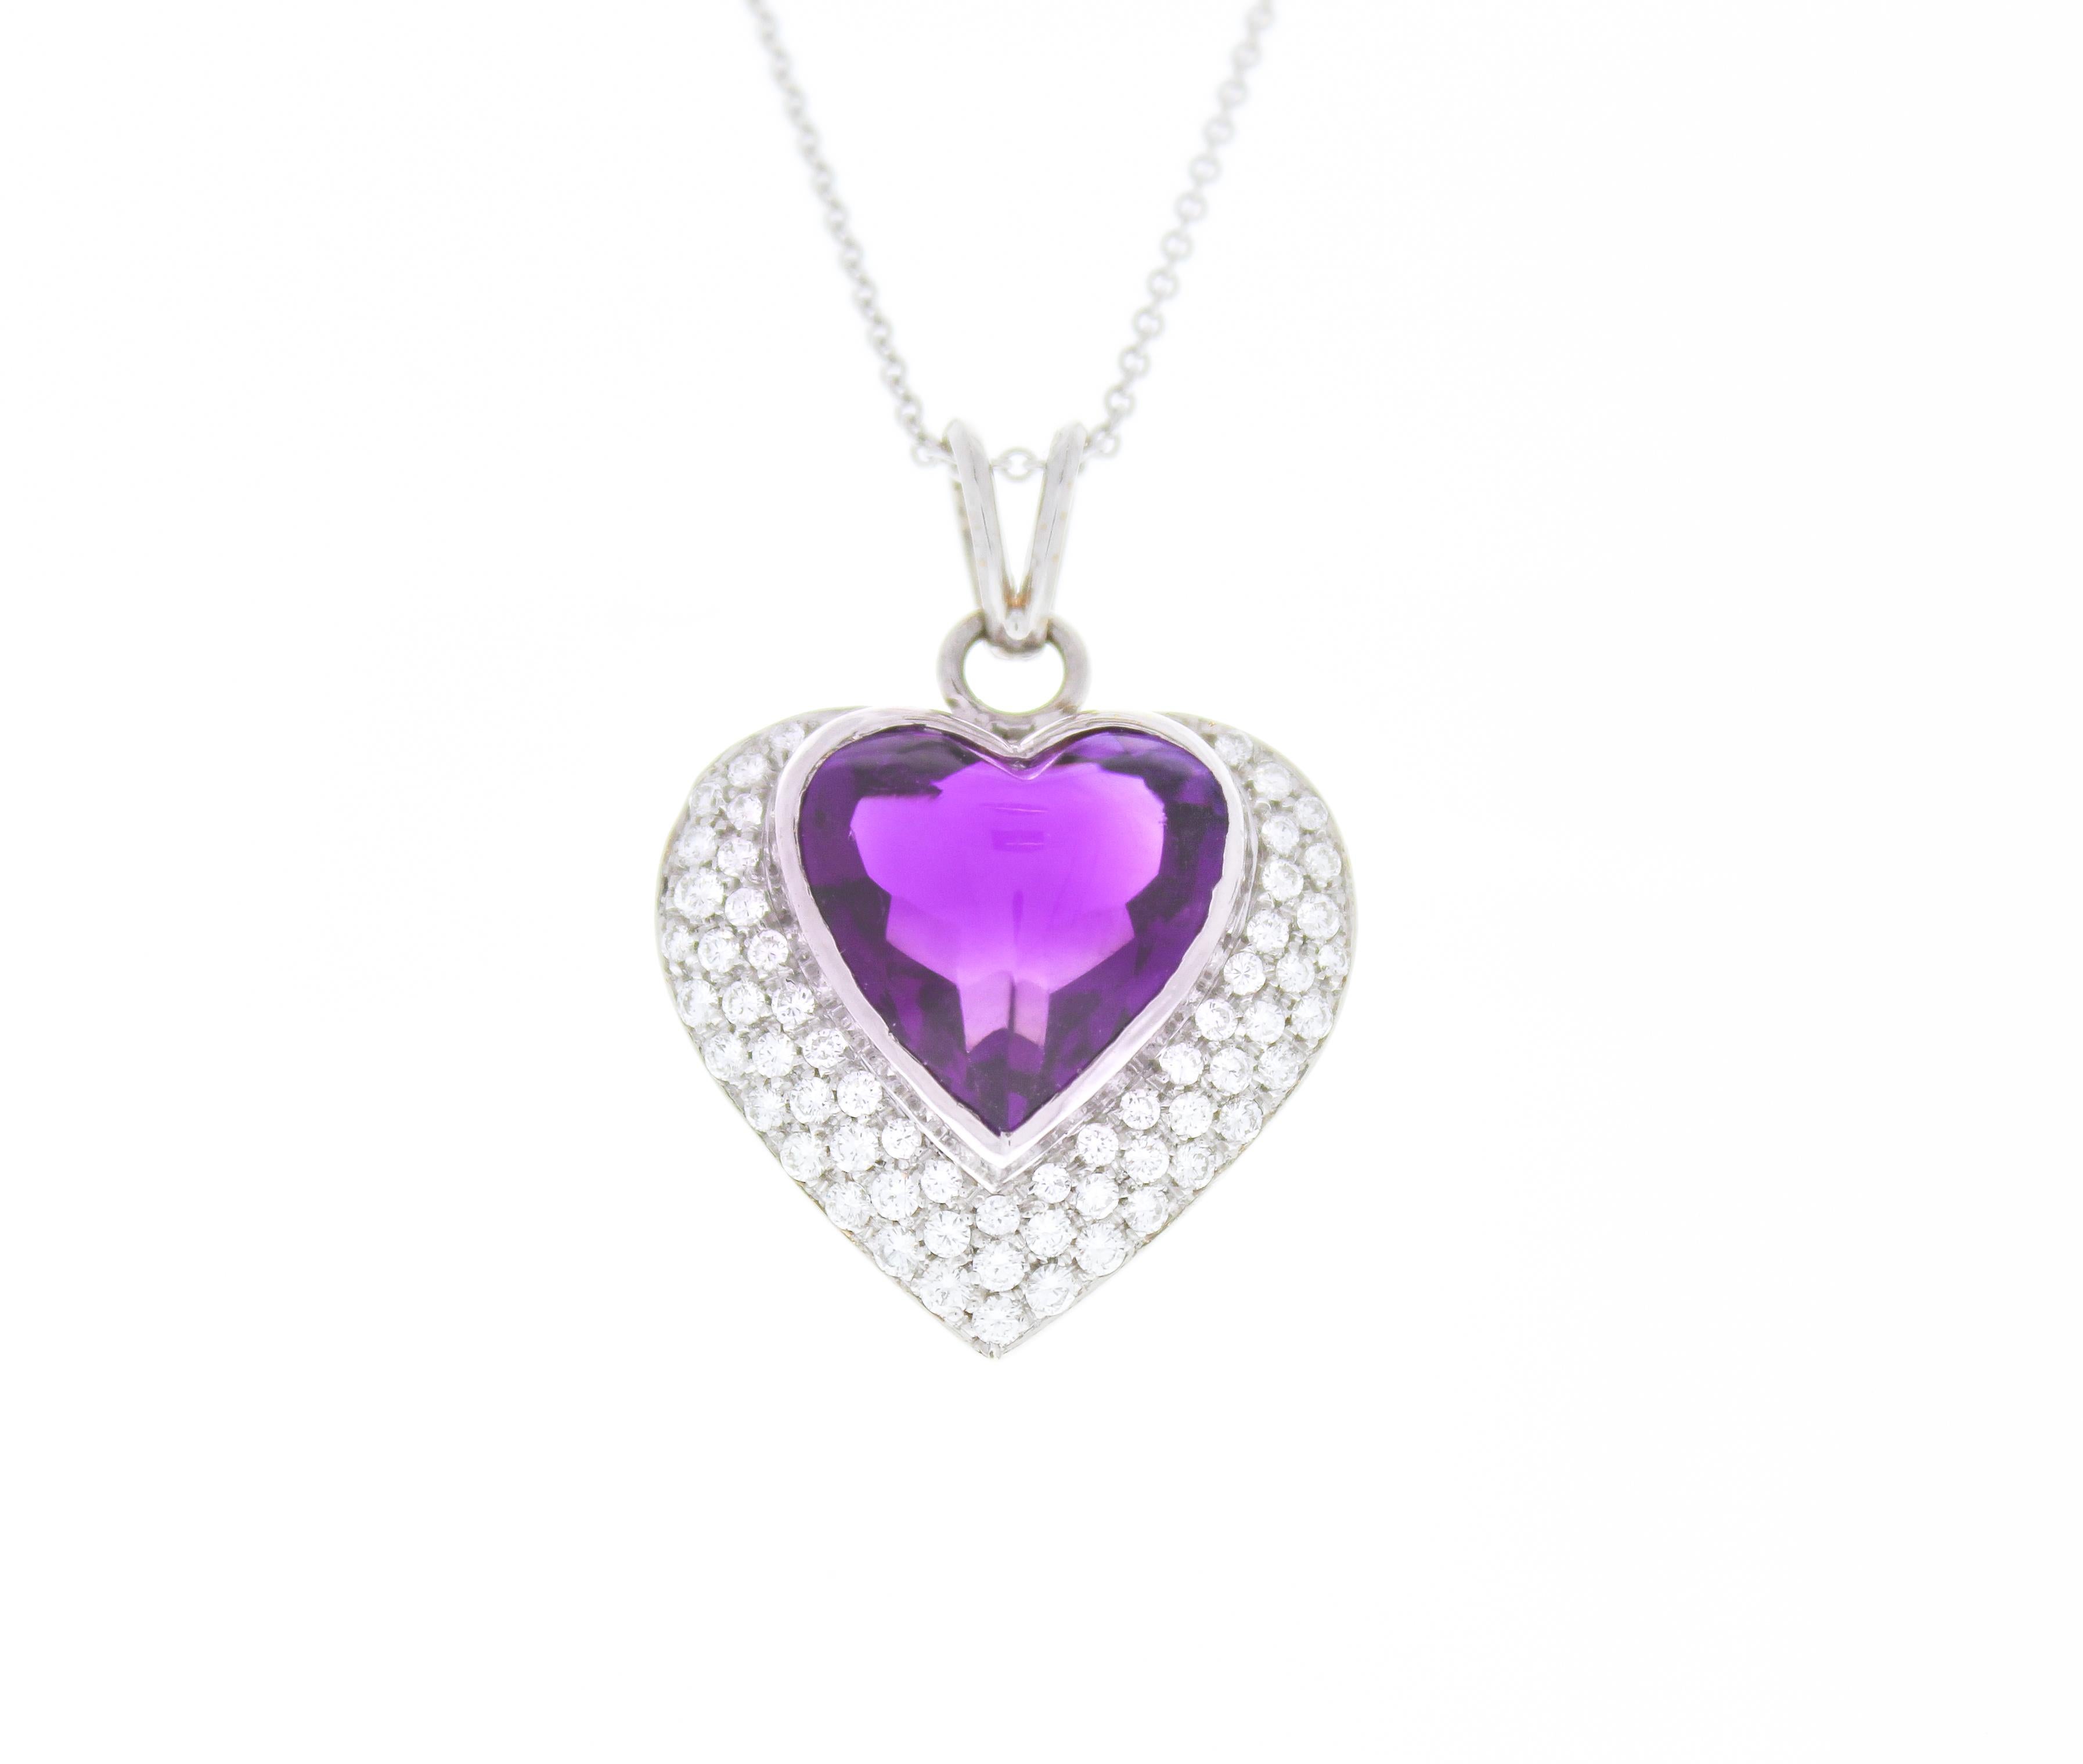 Contemporary 5 Carat Cabochon Heart Shaped Amethyst & Diamond Pendant In 14k White Gold